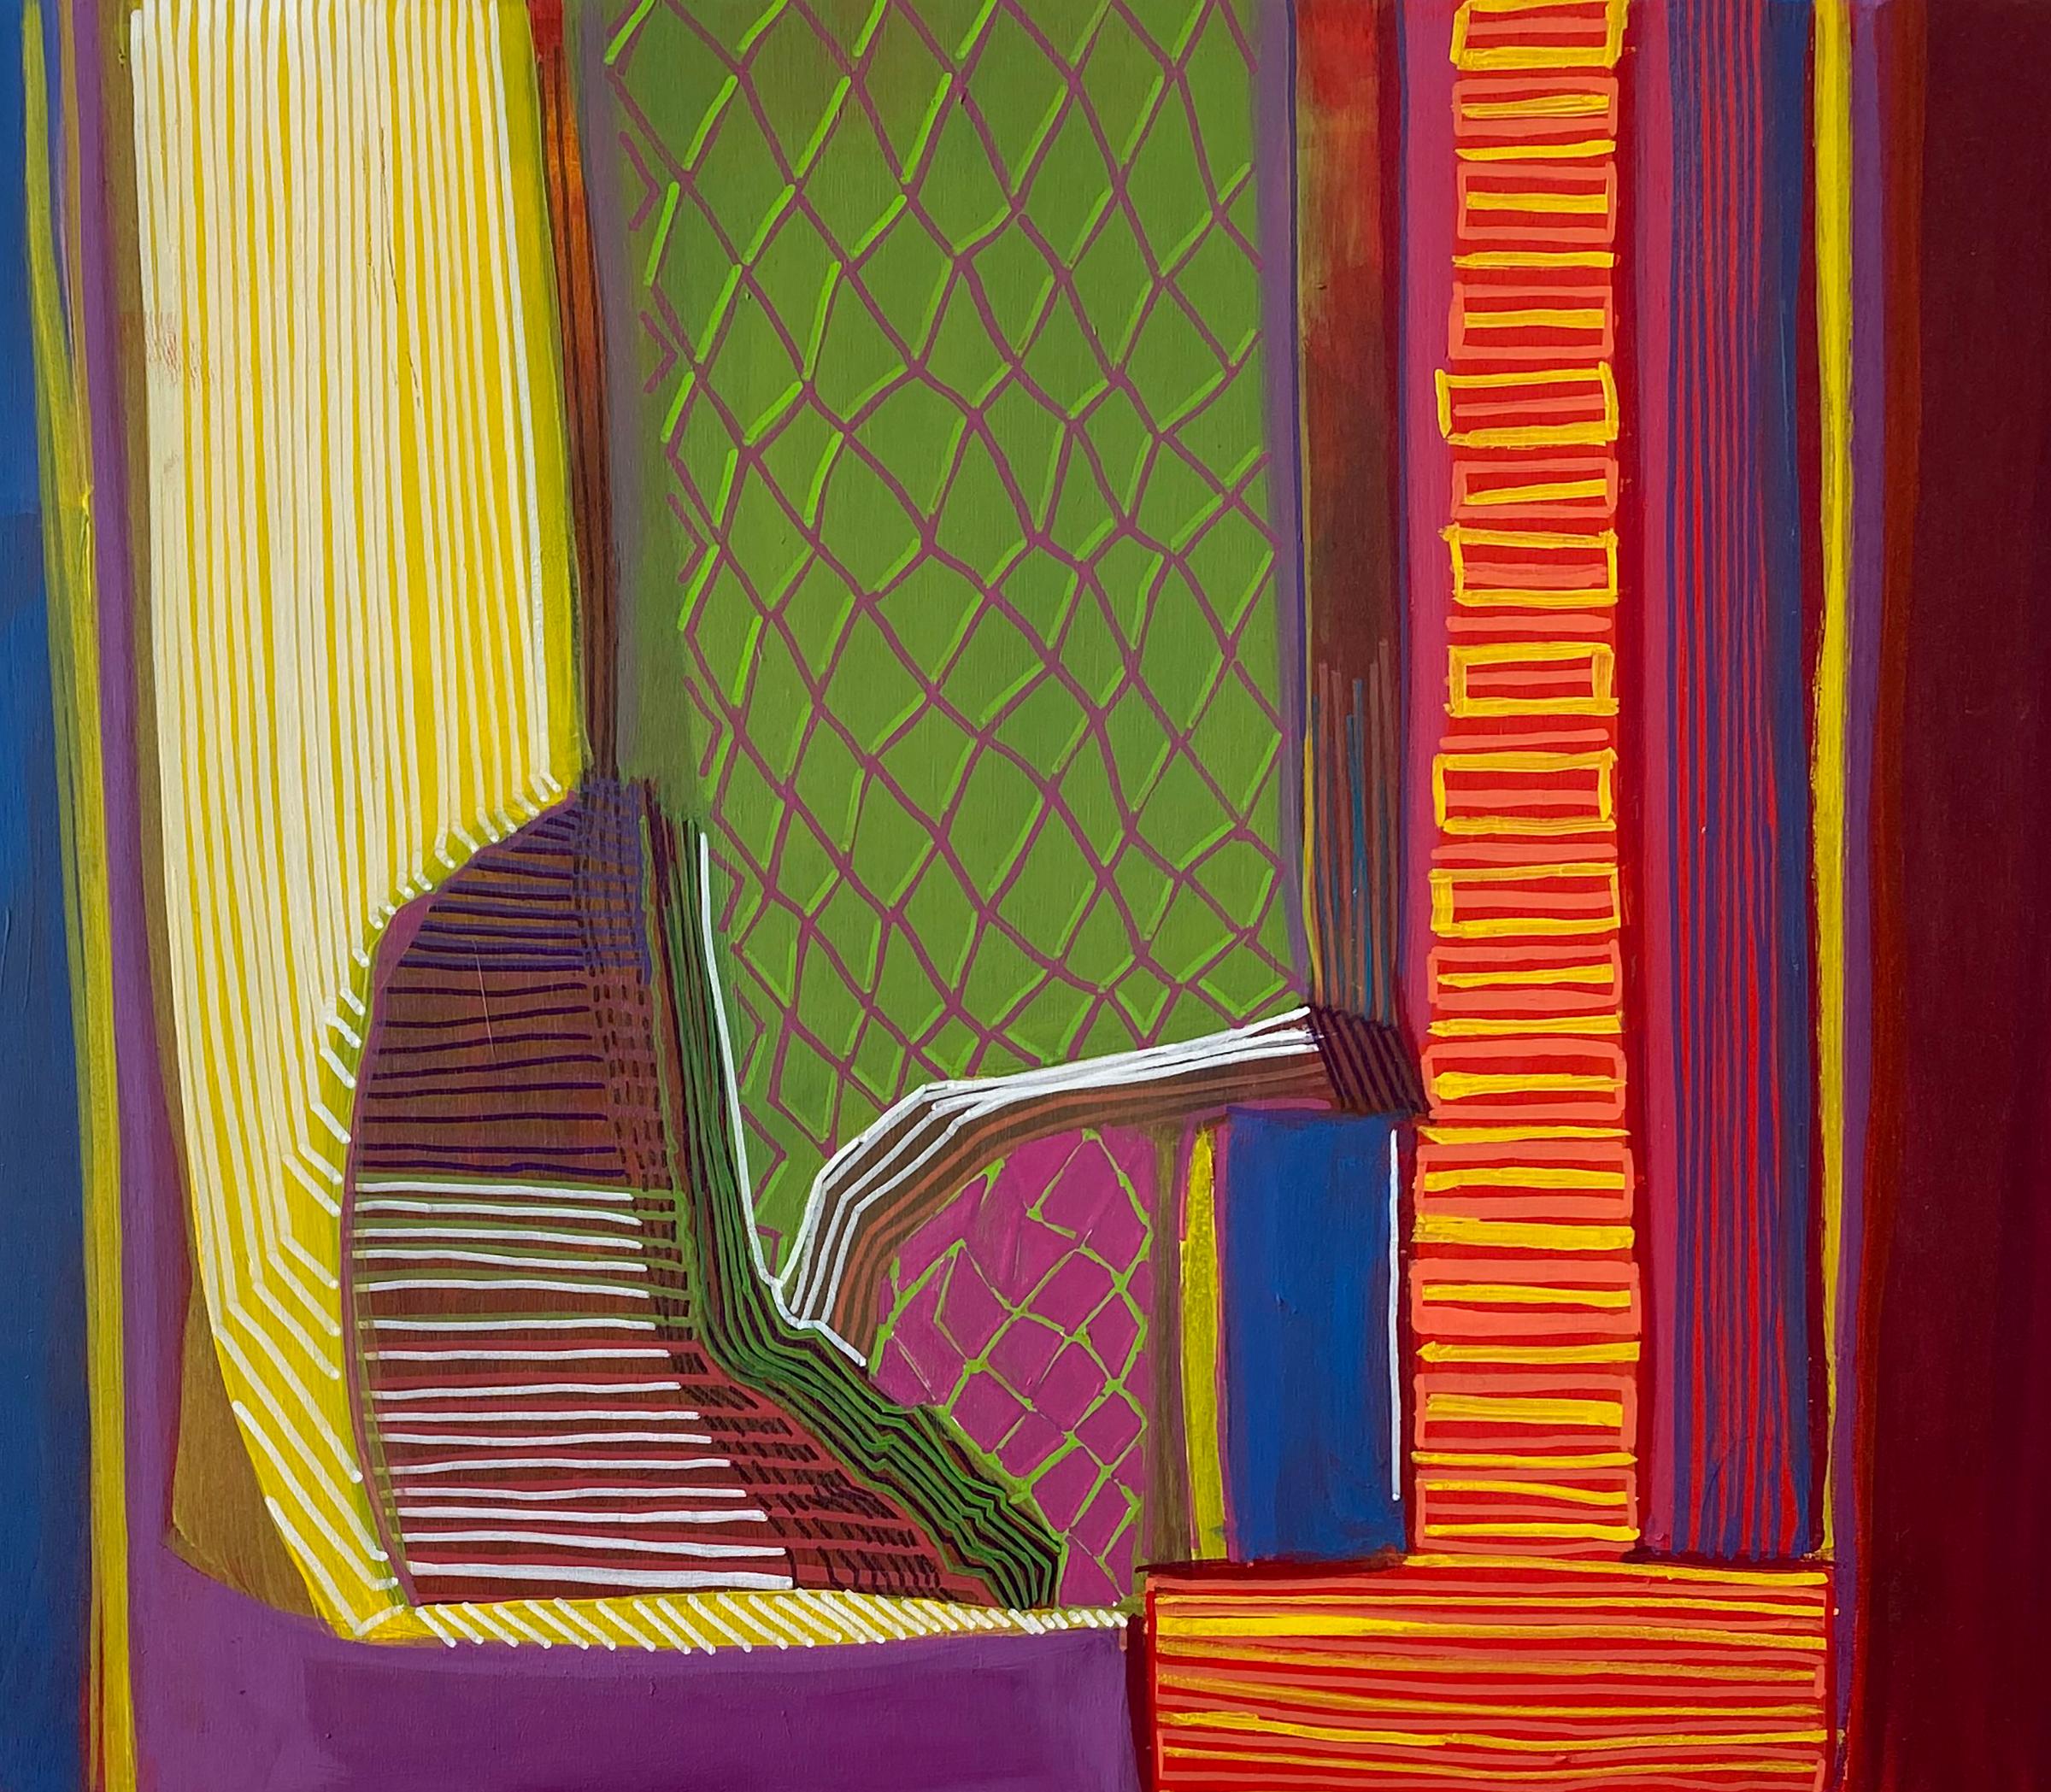 Cynthia Rojas creates her paintings with an insistent, intuitive line and colorful, eccentric shapes. Annual trips to Mexico have had a major influence on her  palette and vintage textiles, architectural motifs and aerial landscape views influence